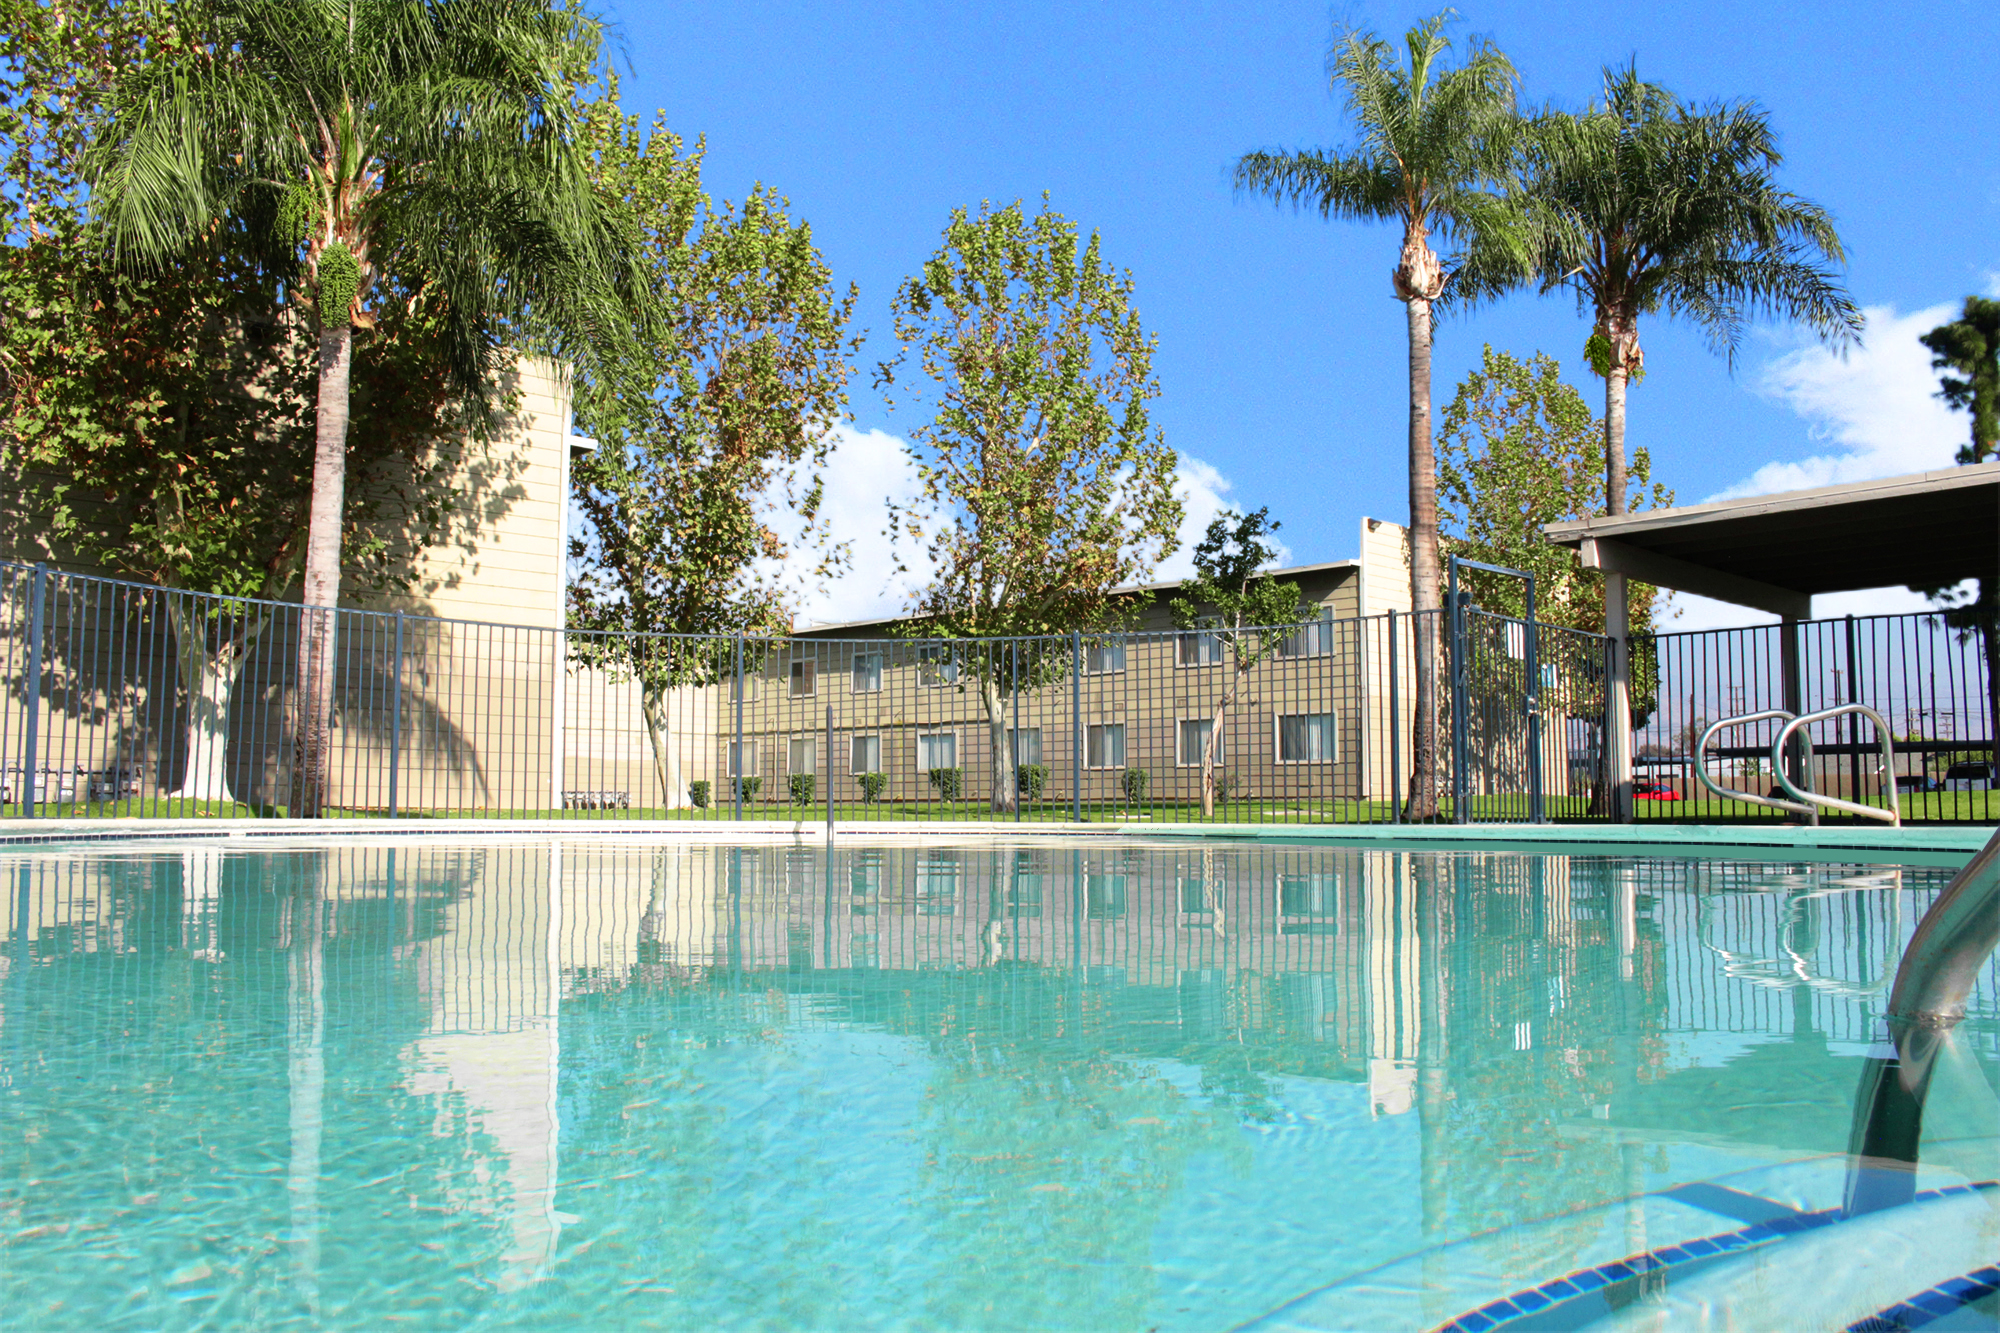 This banner image shows the swimming pool of the Village Square Apartments.